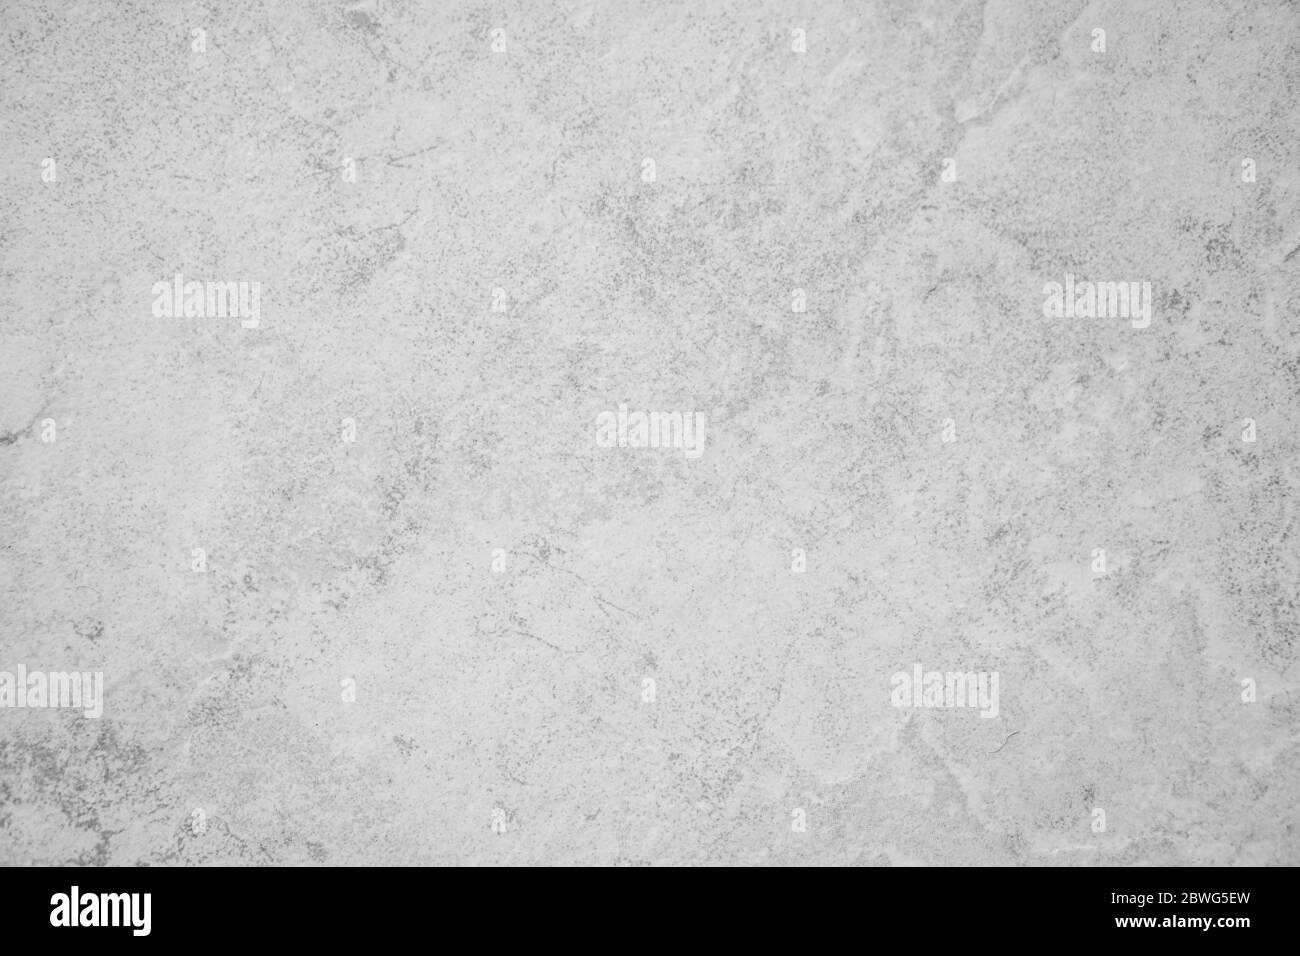 grey concrete texture from above Stock Photo